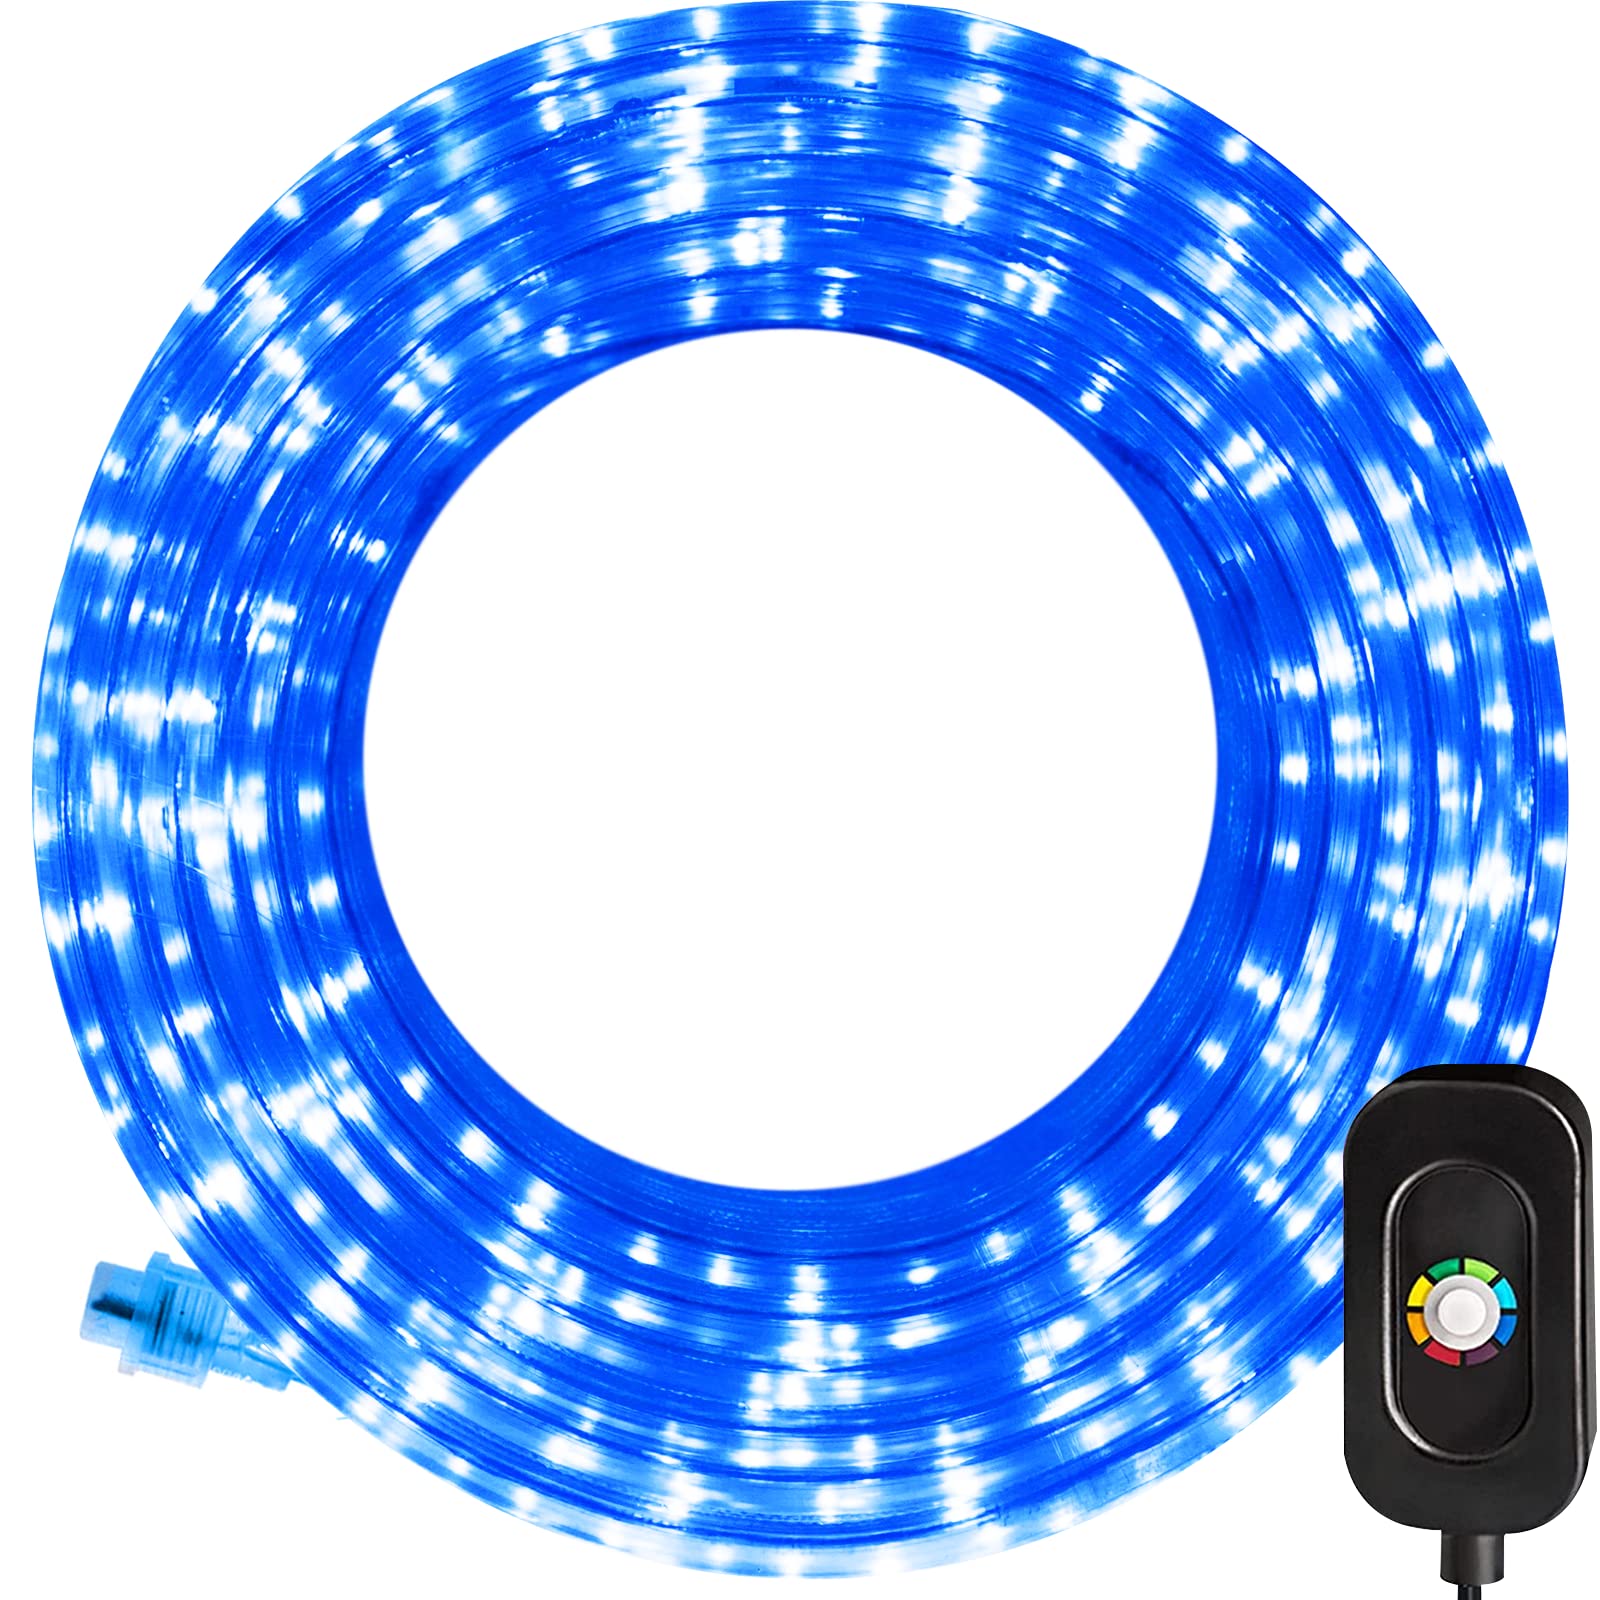 SURNIE Blue Rope Lights Outdoor 50ft Flexible Blue LED Strip Lights Waterproof Dimmable Low Voltage Rope Lighting Cuttable,Indoor Outdoor Plug in L...